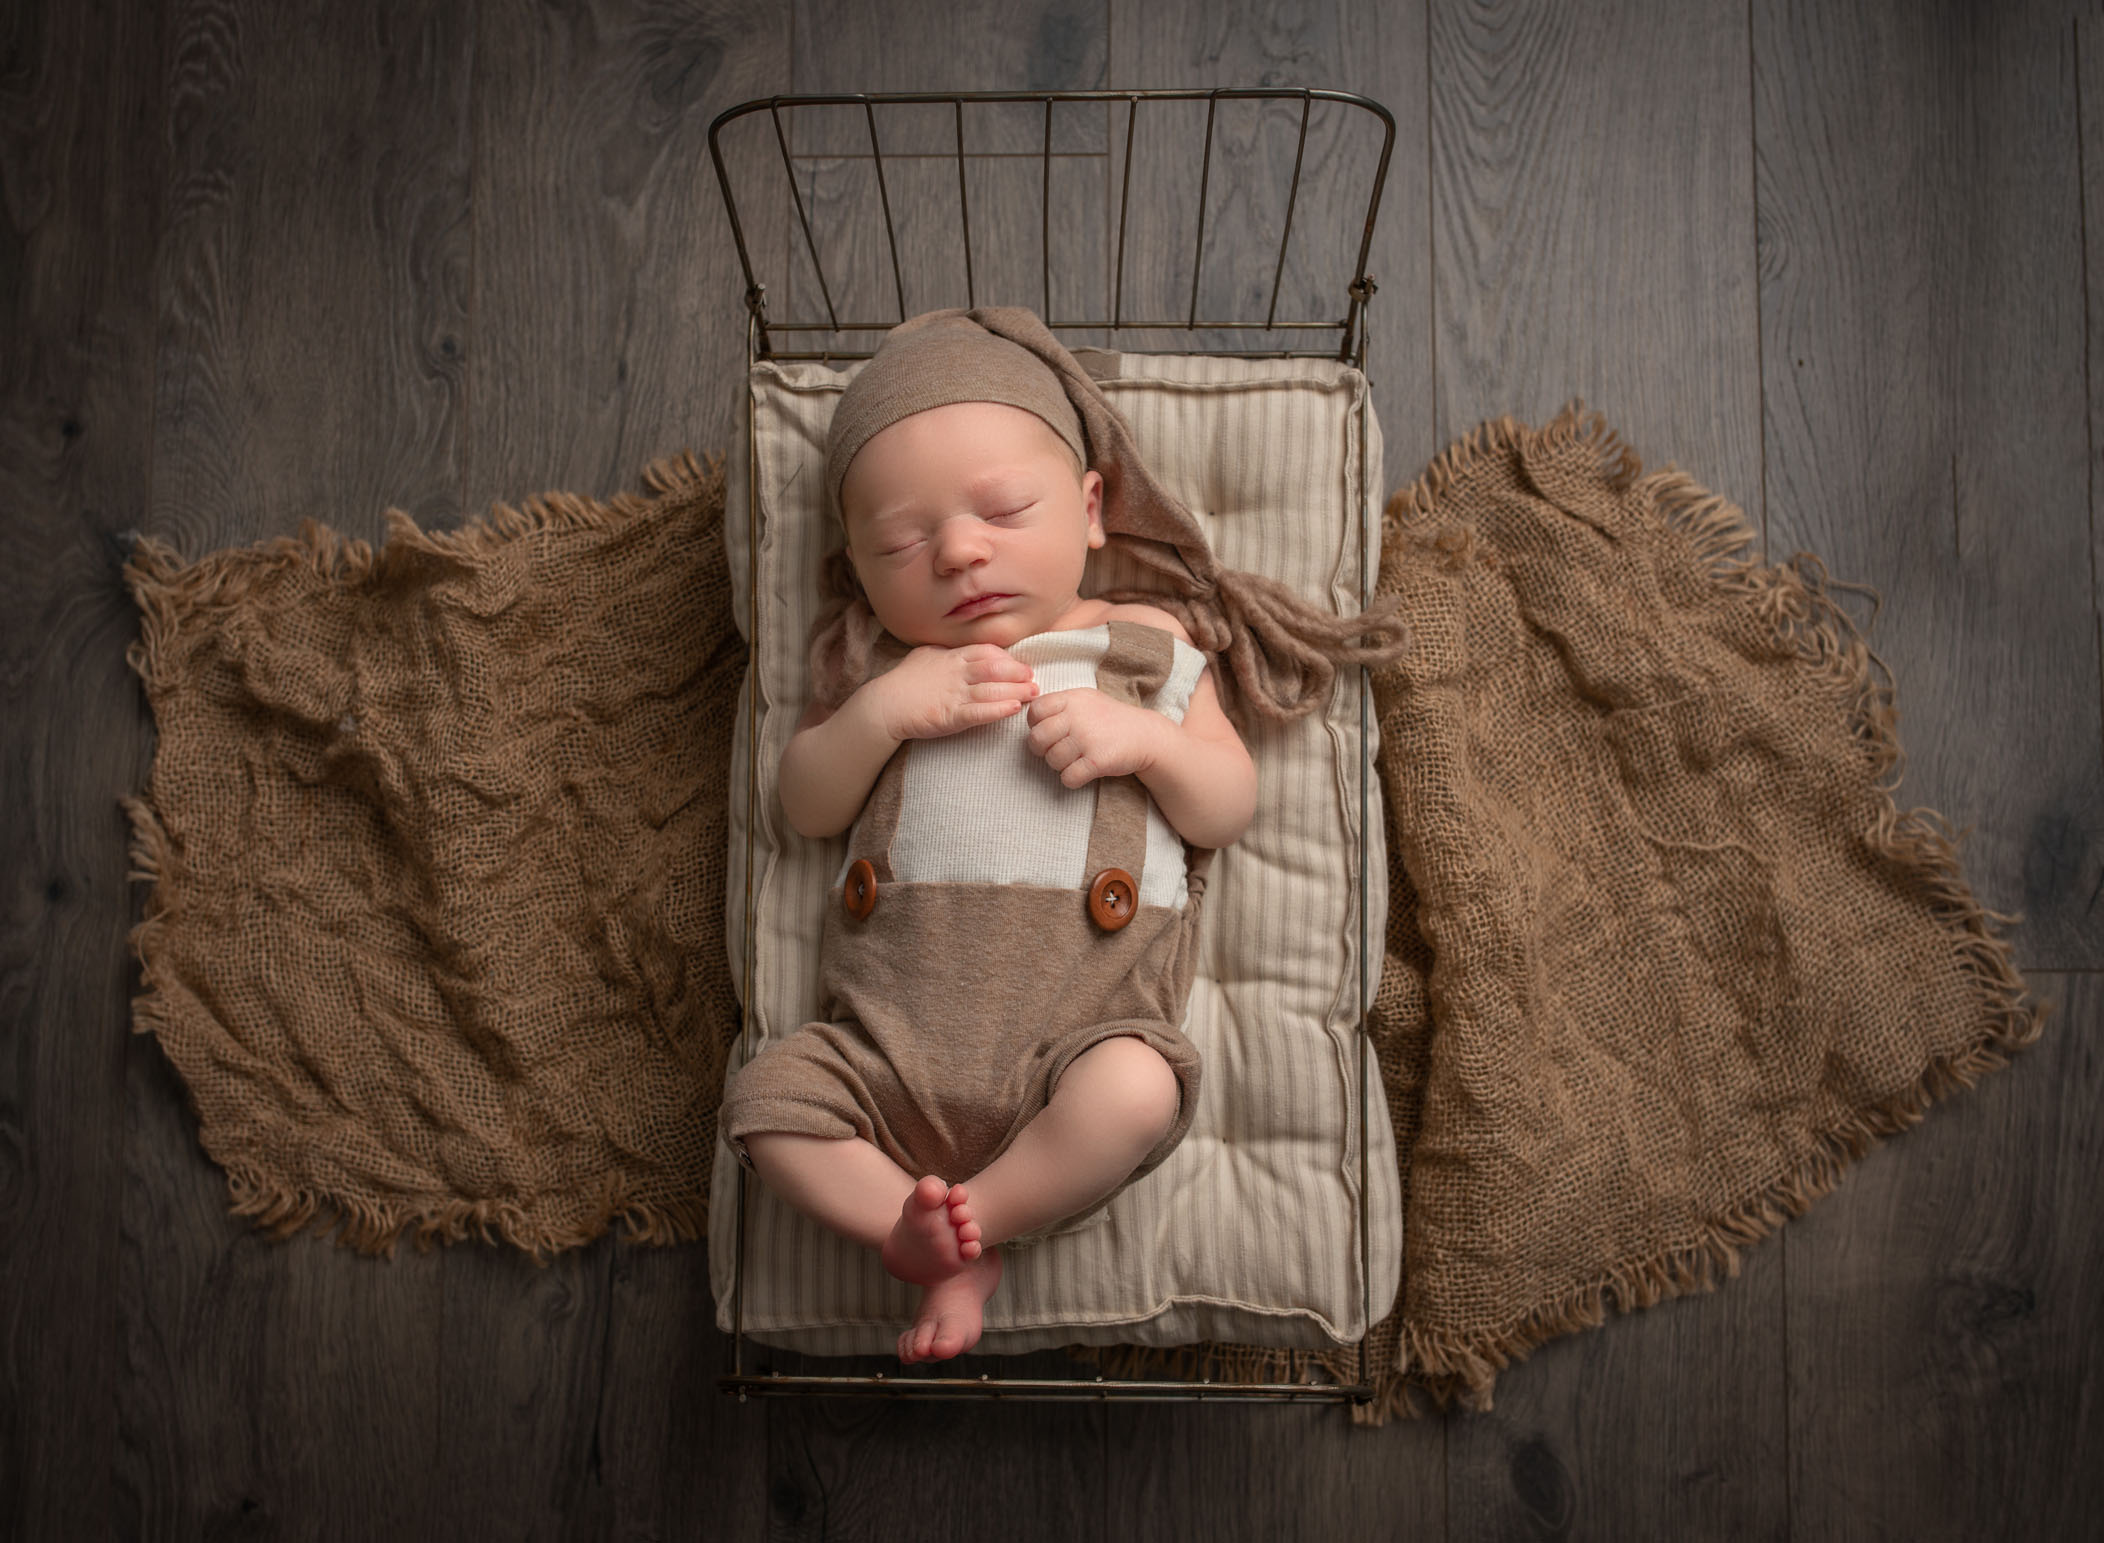 Newborn baby dressed in old fashioned suspenders and nite cap sleeping in wire framed bed